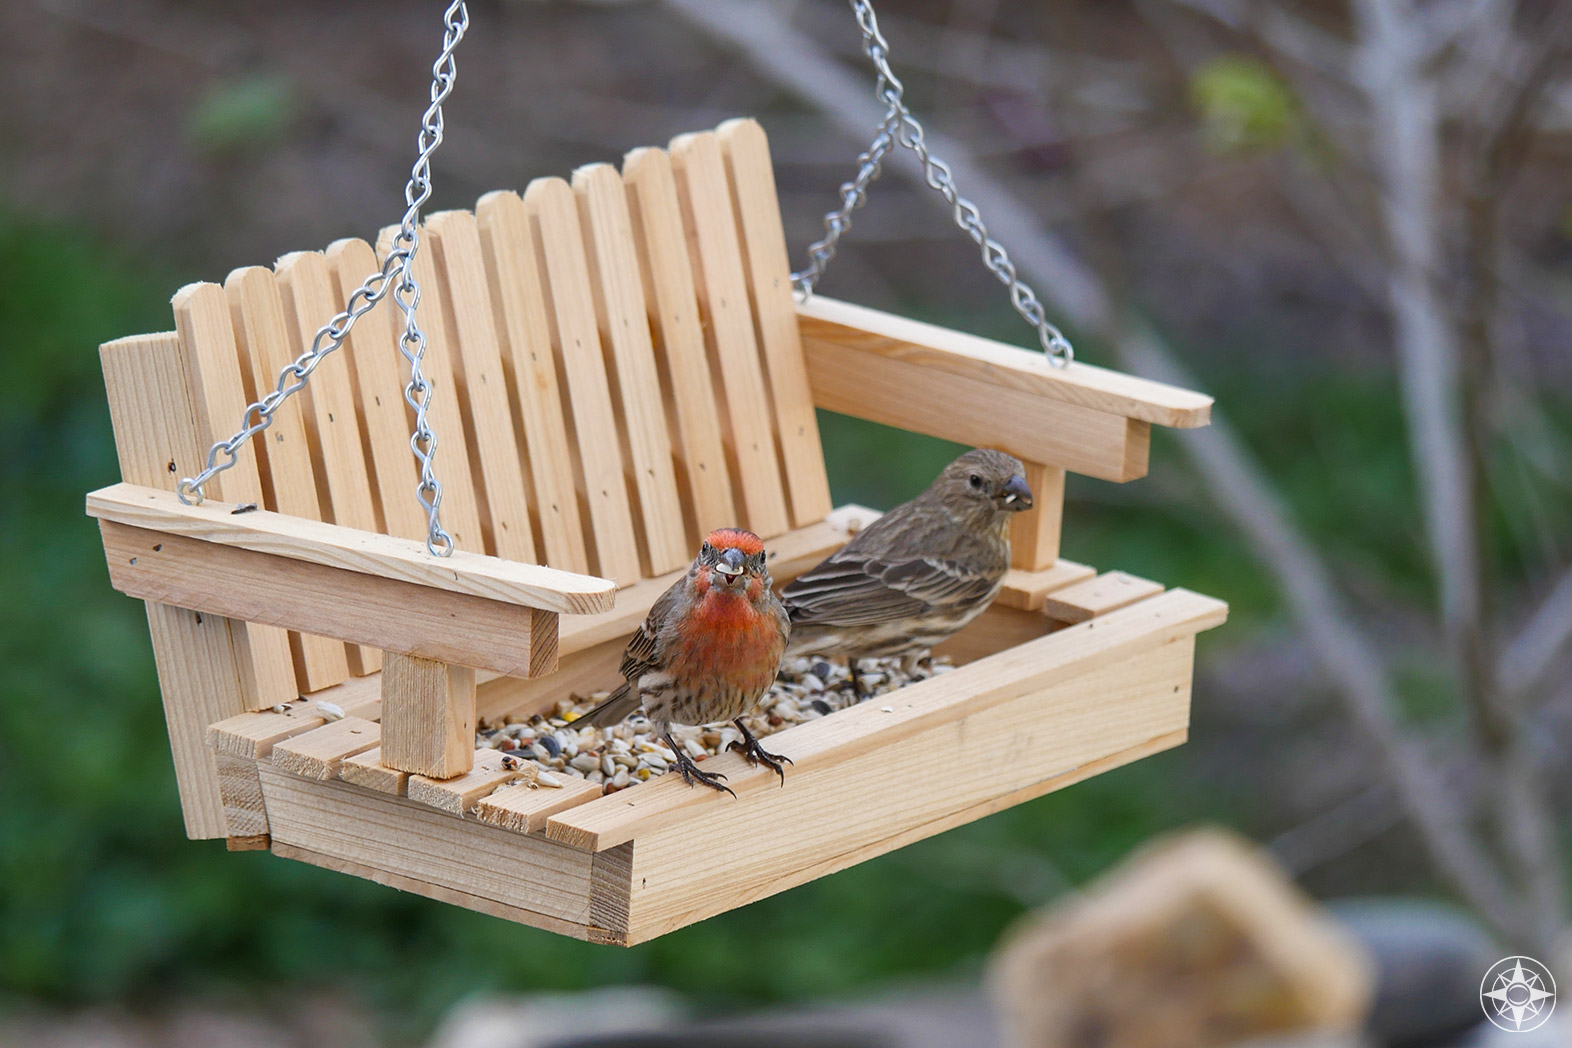 House finches on wooden swing bird feeder, brown bird with red chest and orange chest, great backyard bird count